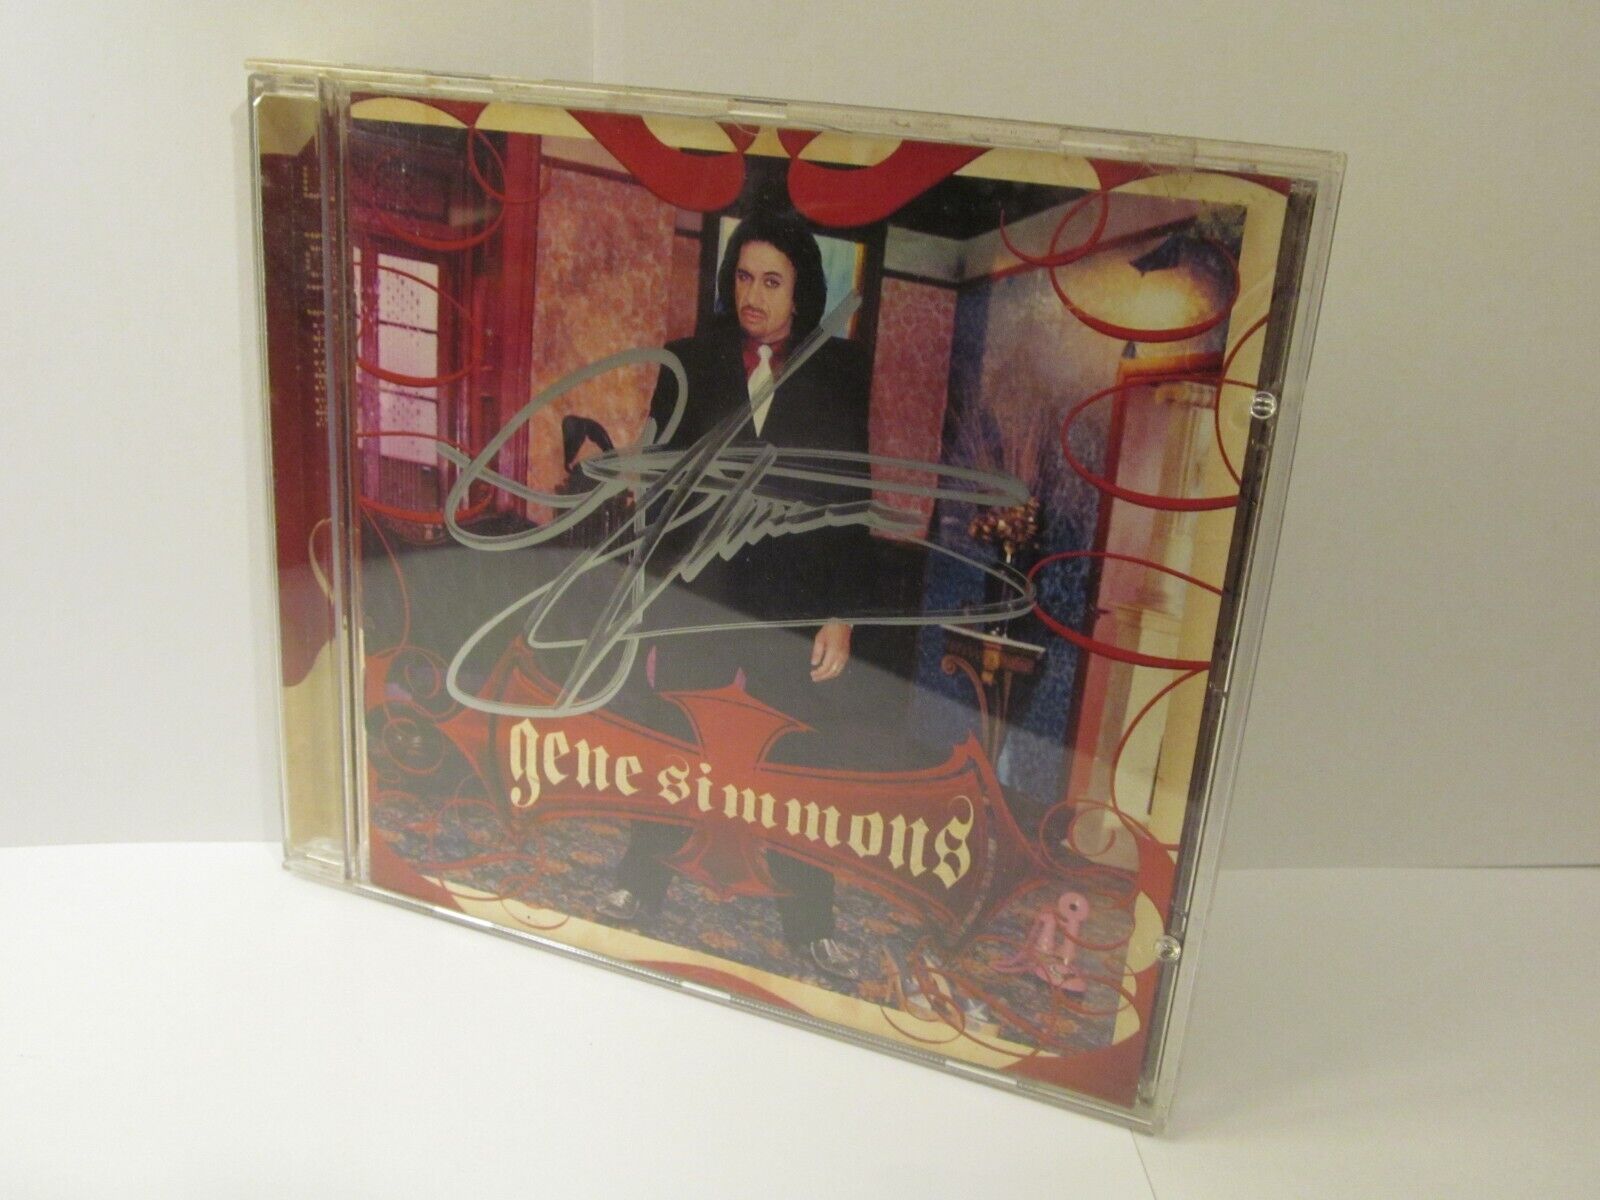 GENE SIMMONS ASSHOLE CD SIGNED AUTOGRAPHED SILVER SHARIE ON FRONT U.S. PRESS